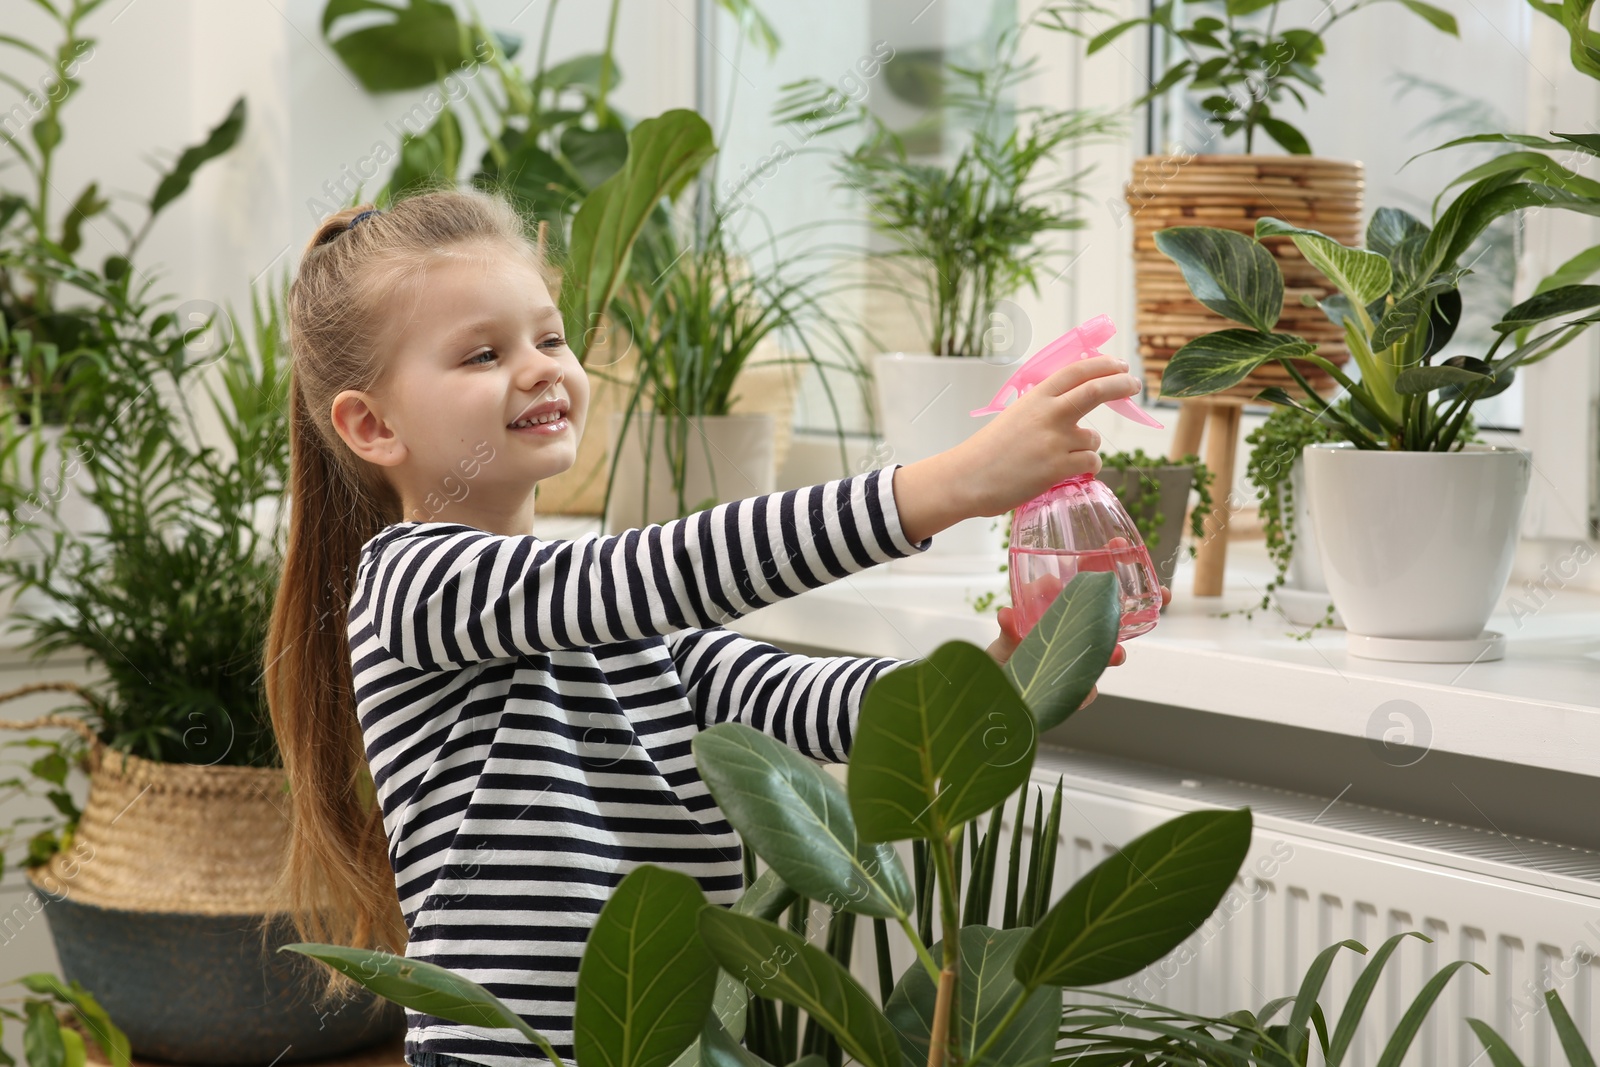 Photo of Cute little girl spraying beautiful green plant on windowsill at home. House decor